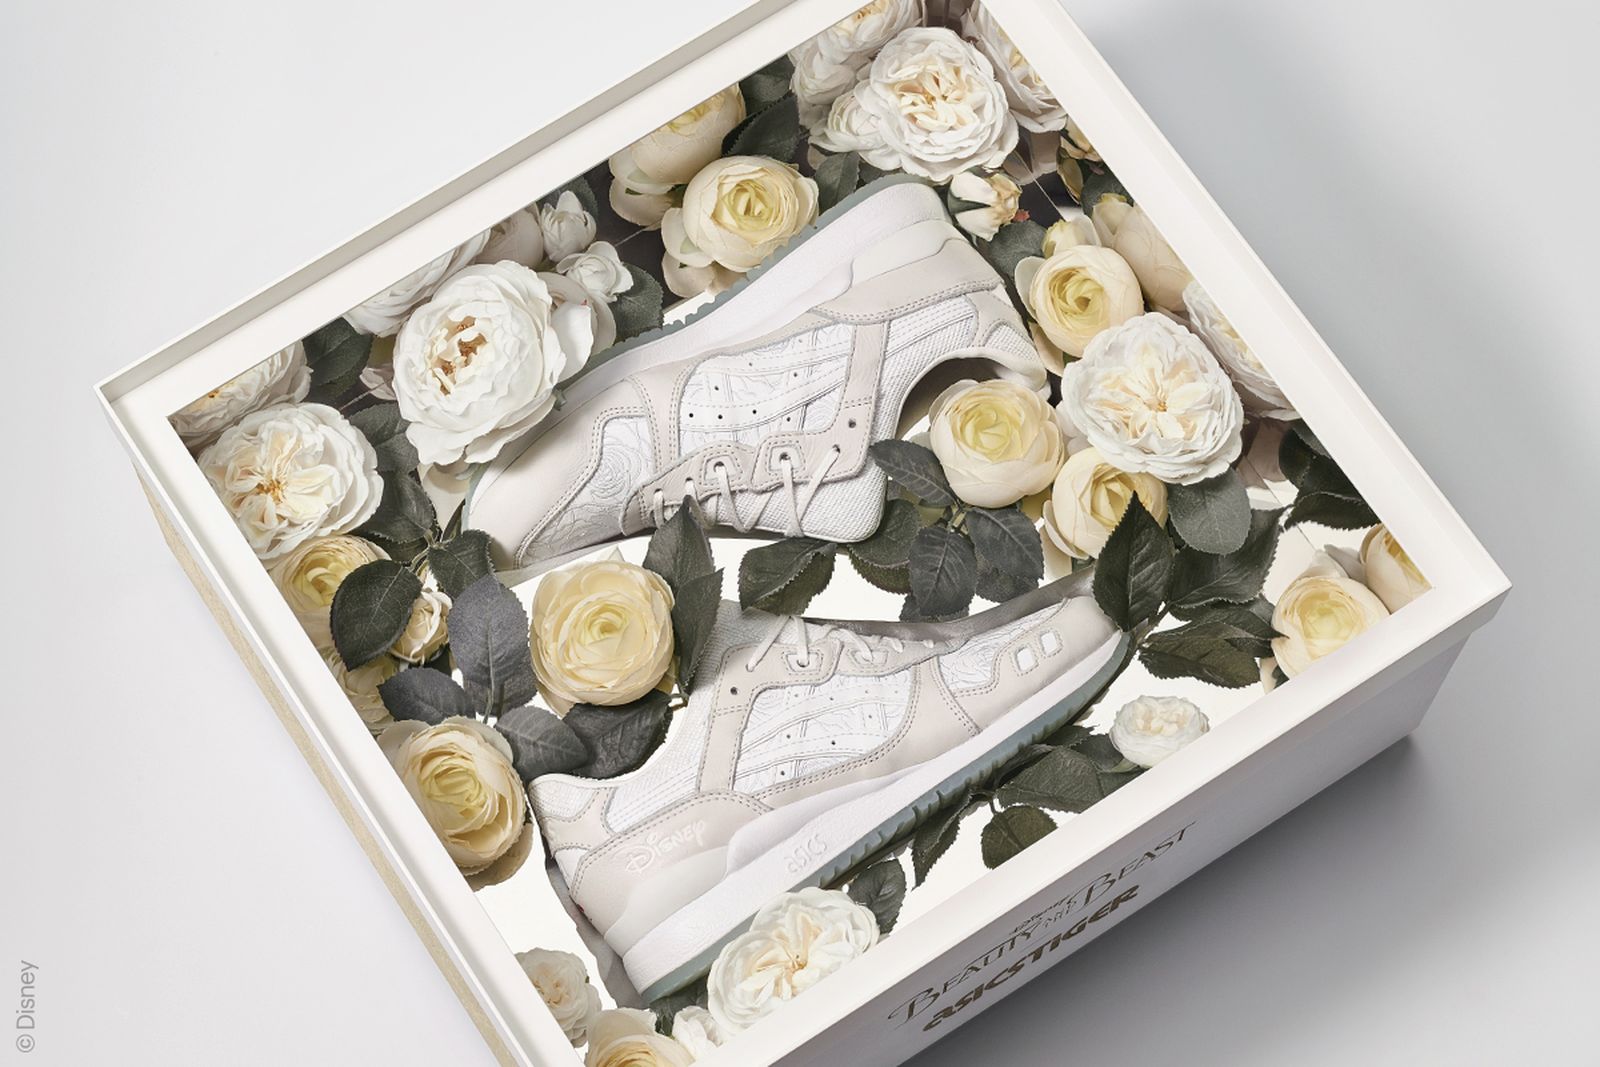 'Beauty and the Beast' sneakers